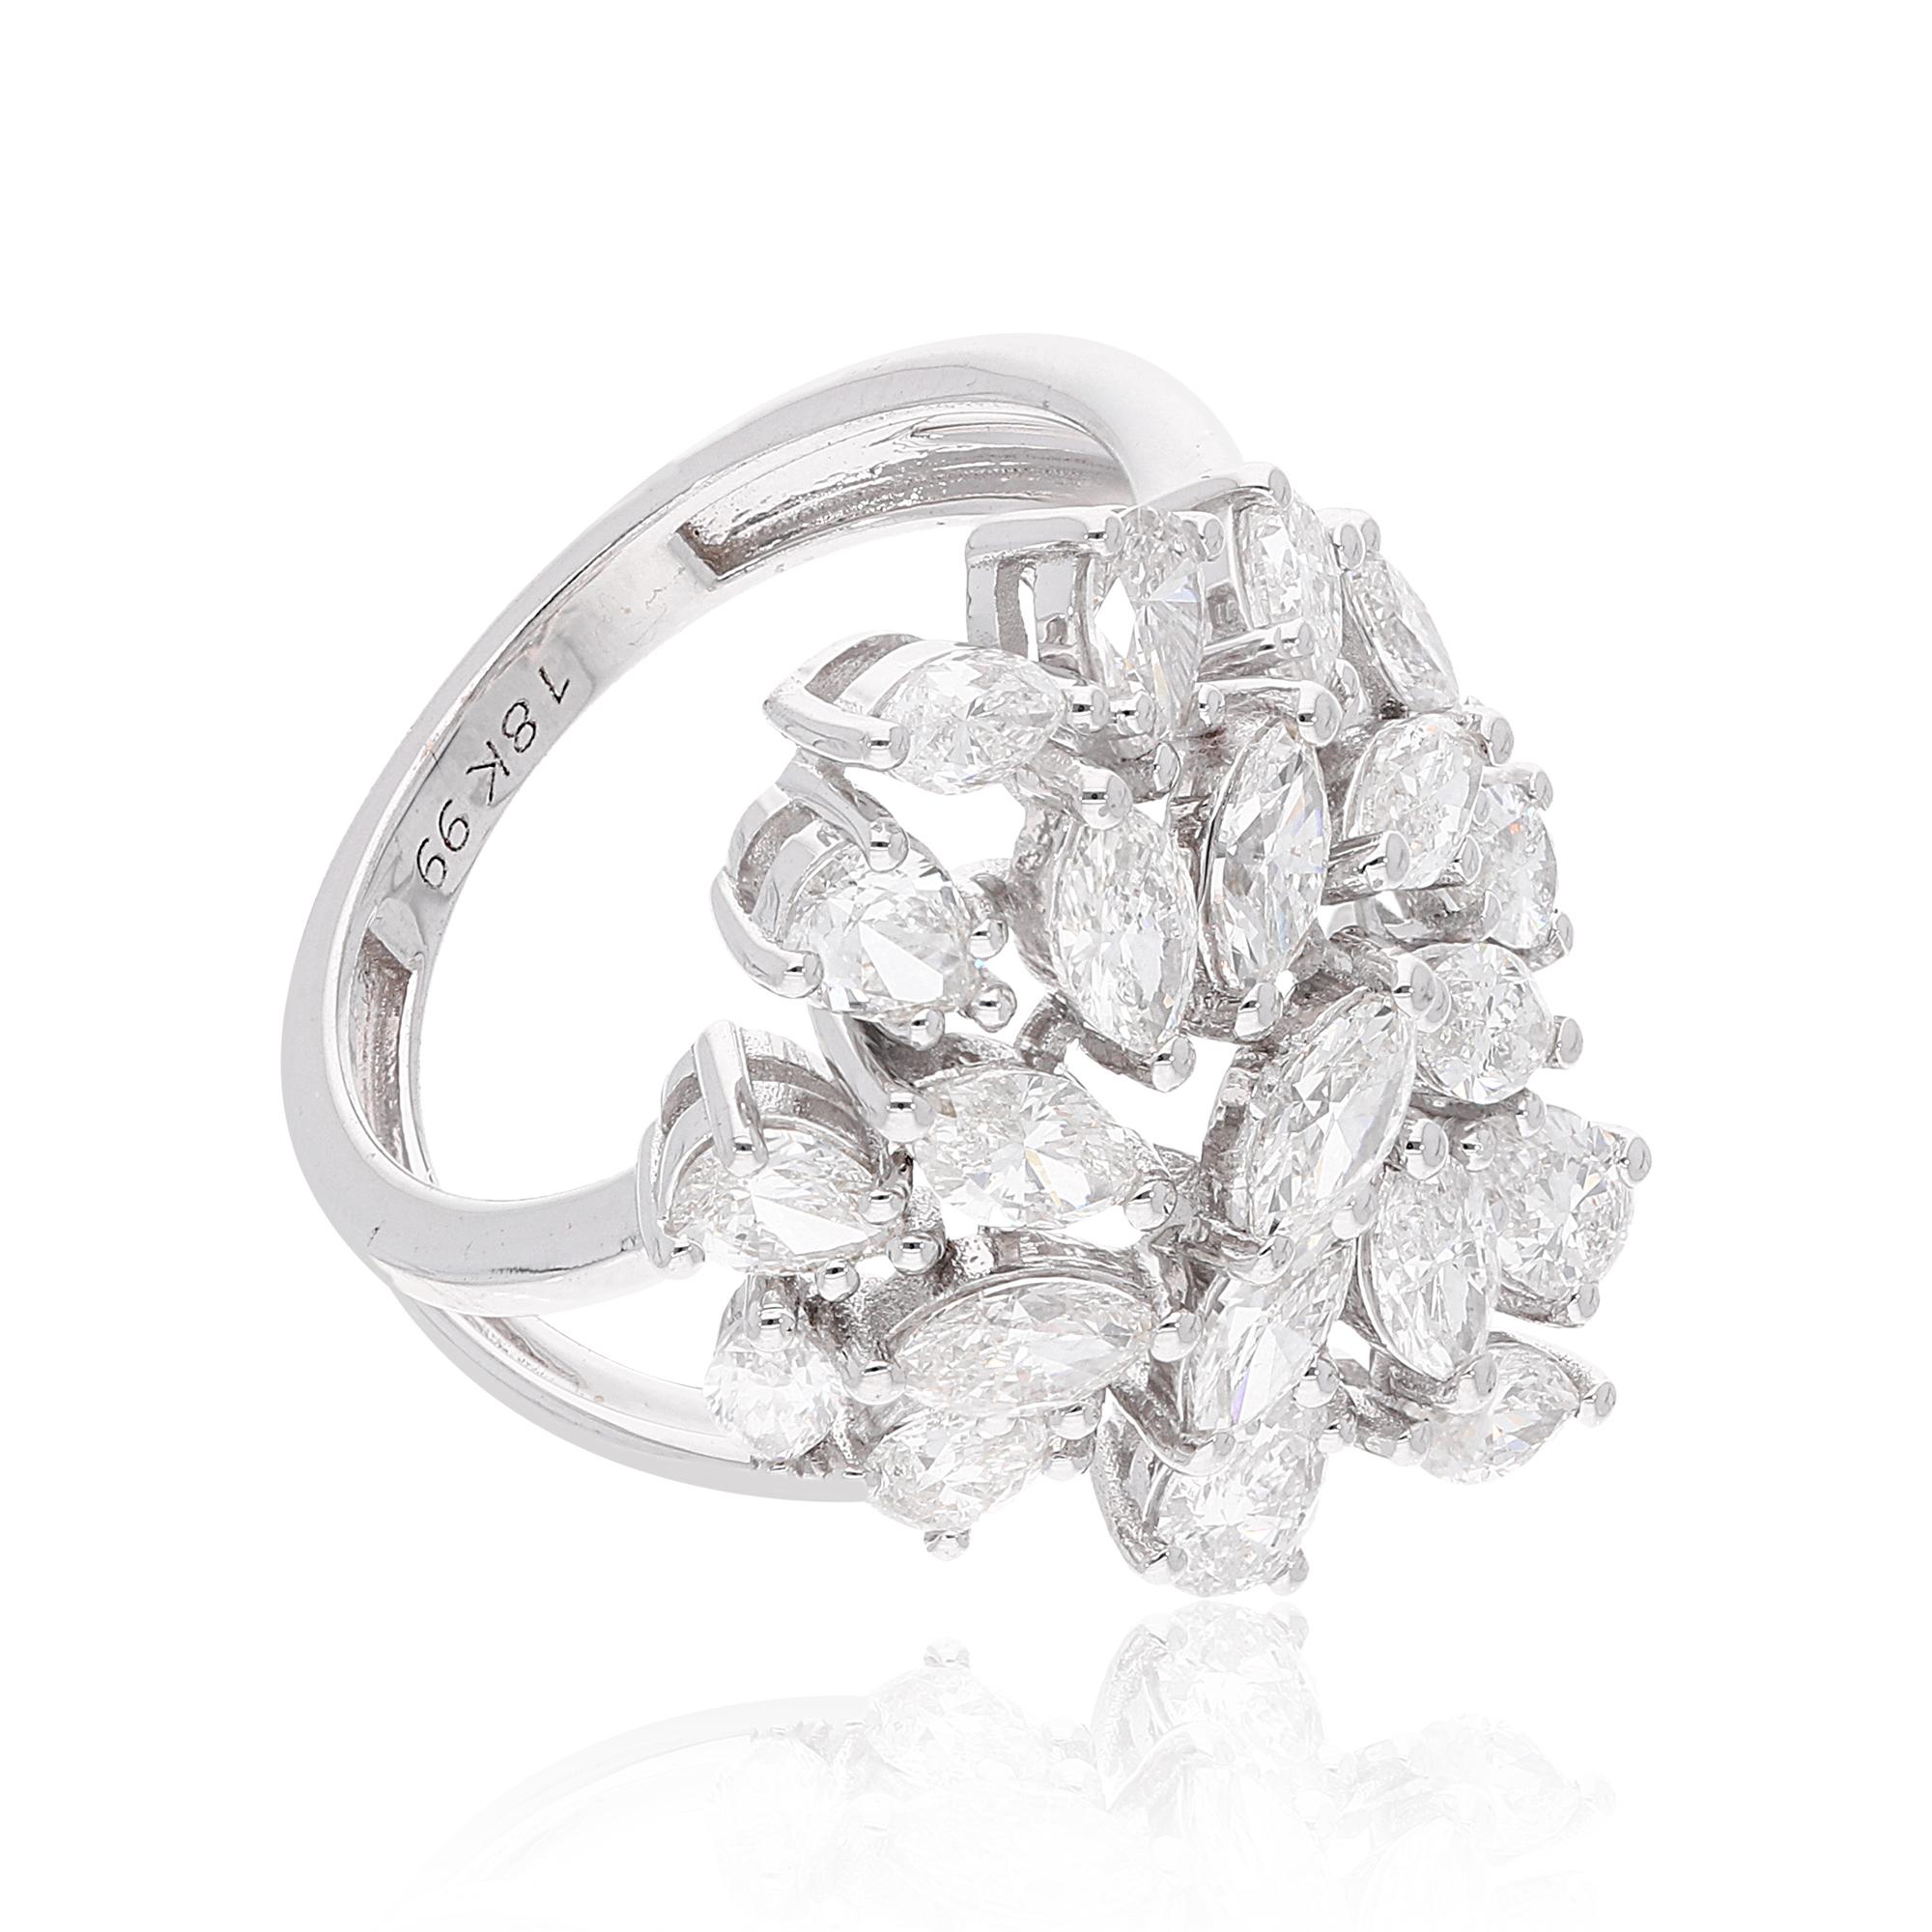 For Sale:  2.81 Carat SI/HI Marquise Pear Diamond Cluster Ring 18 Karat White Gold Jewelry 2